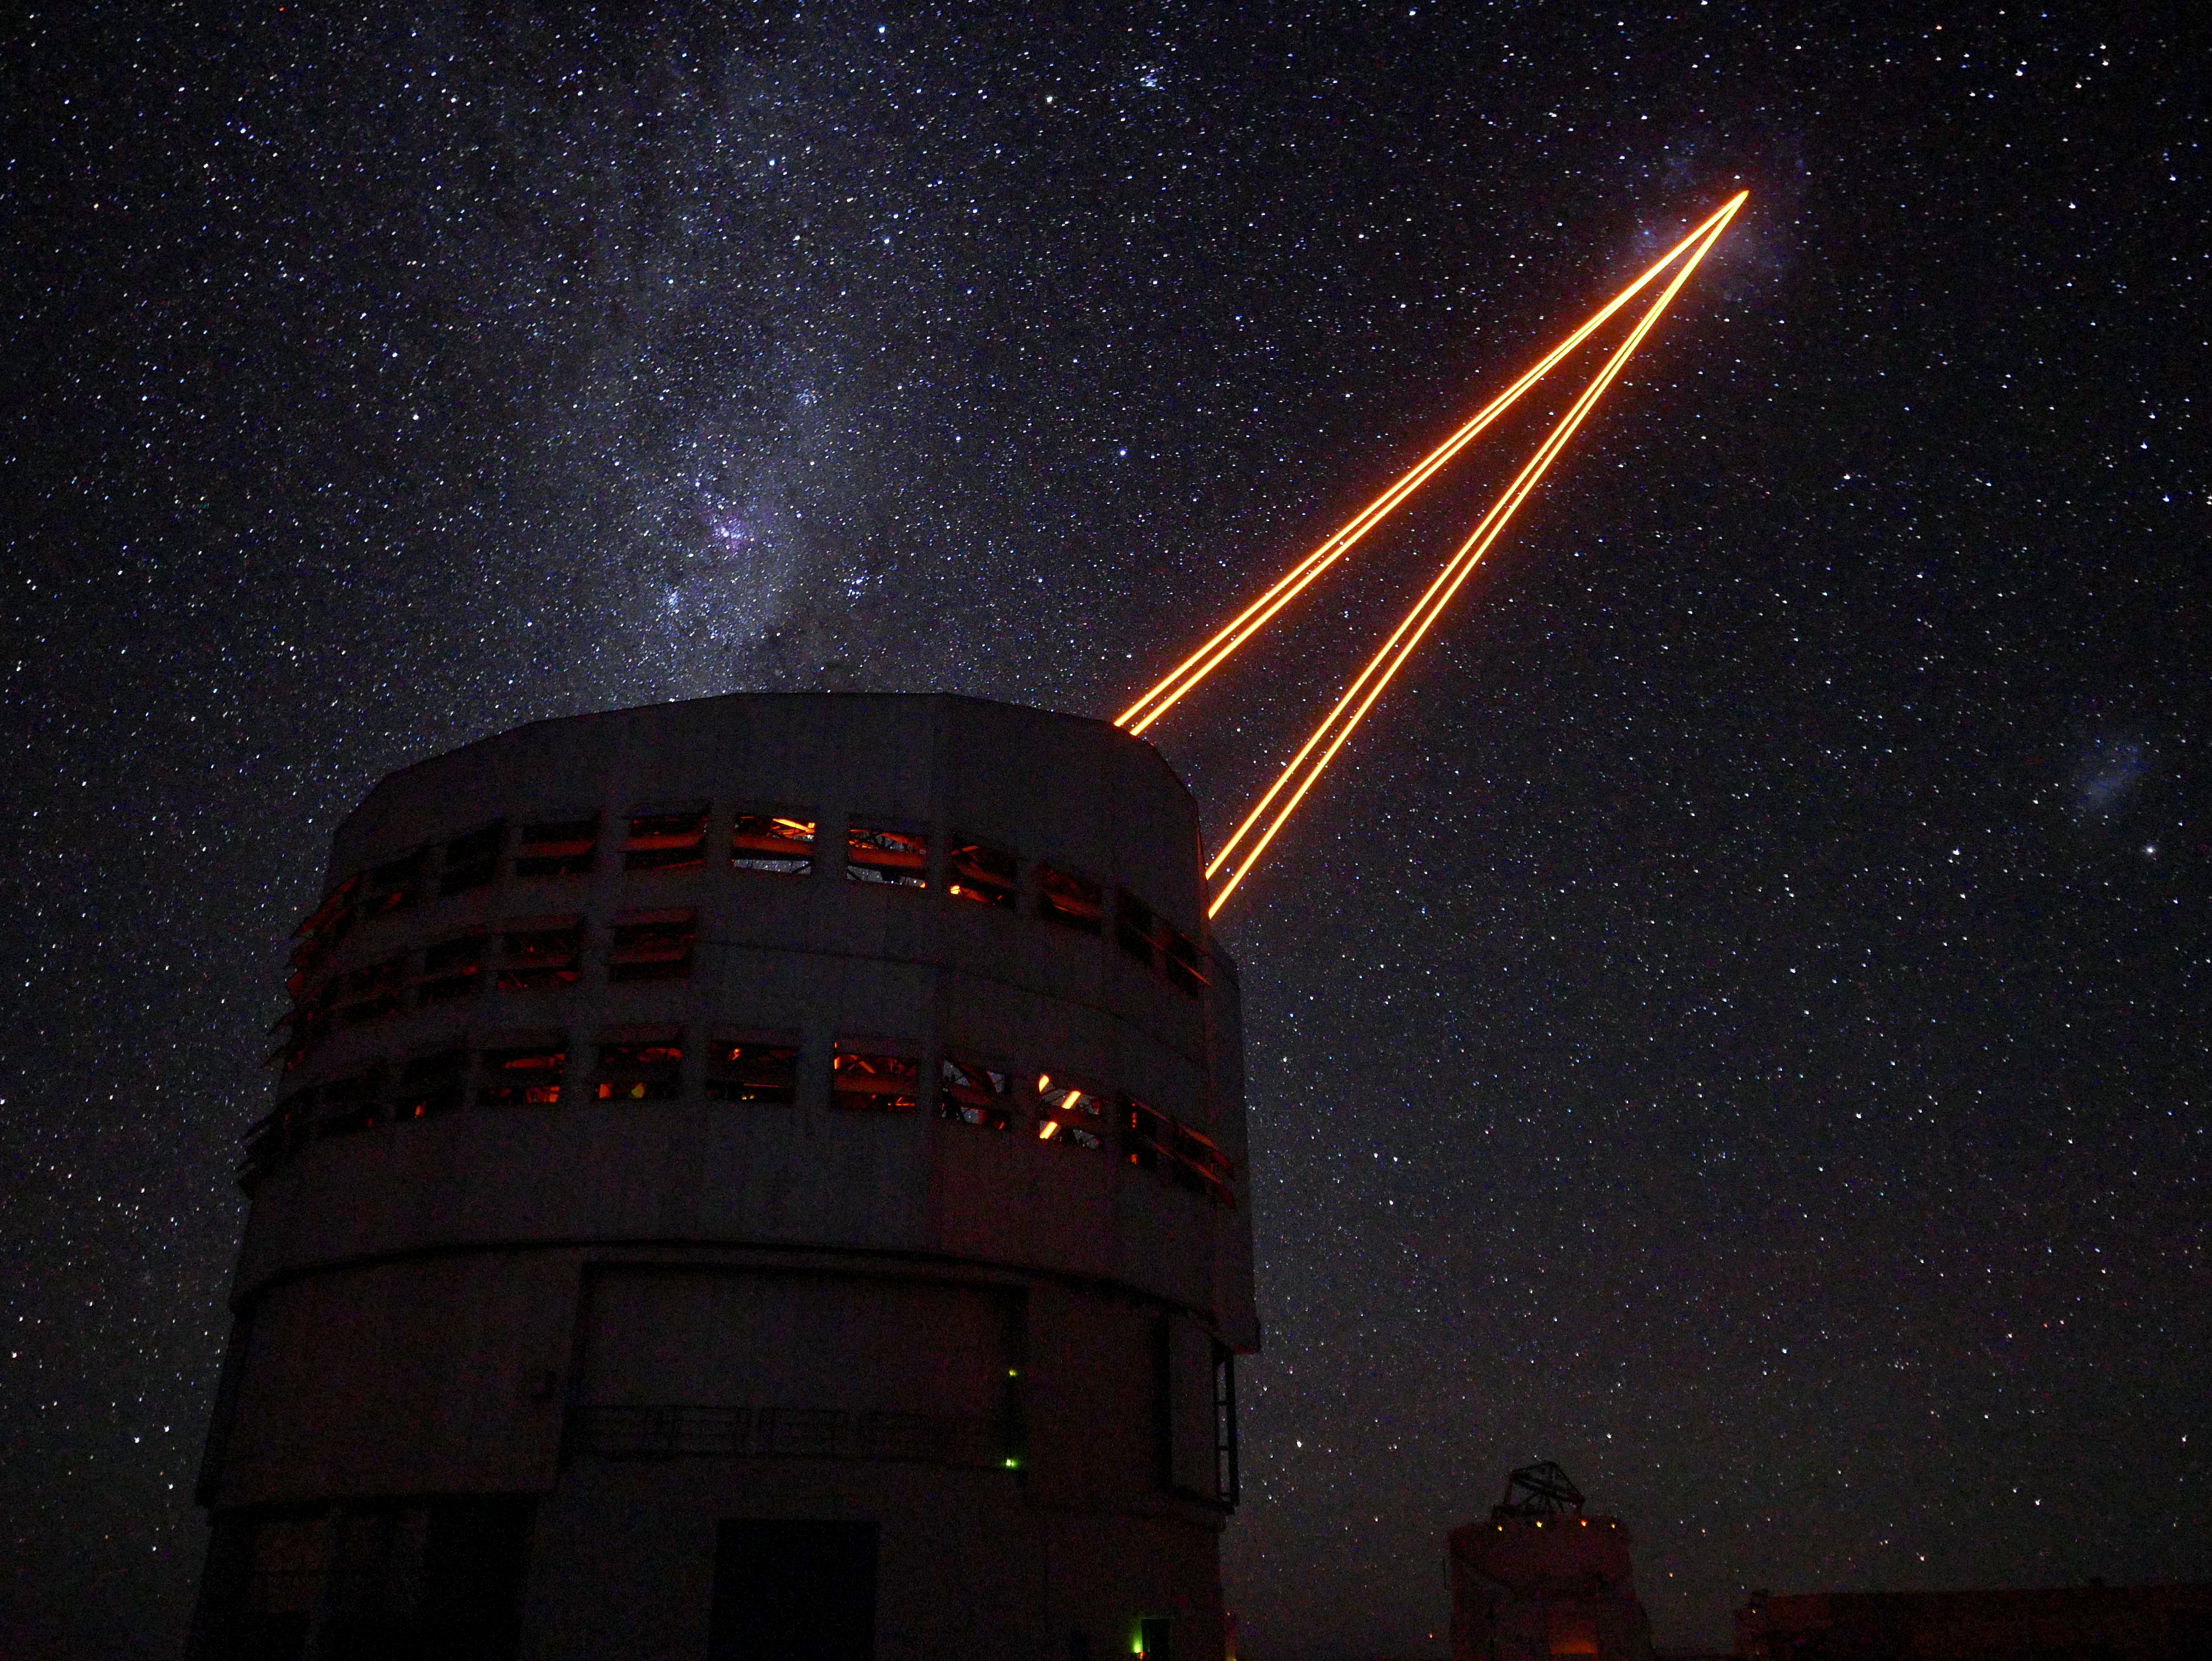 UT4 with the lasers of the Adaptive Optics Facility.